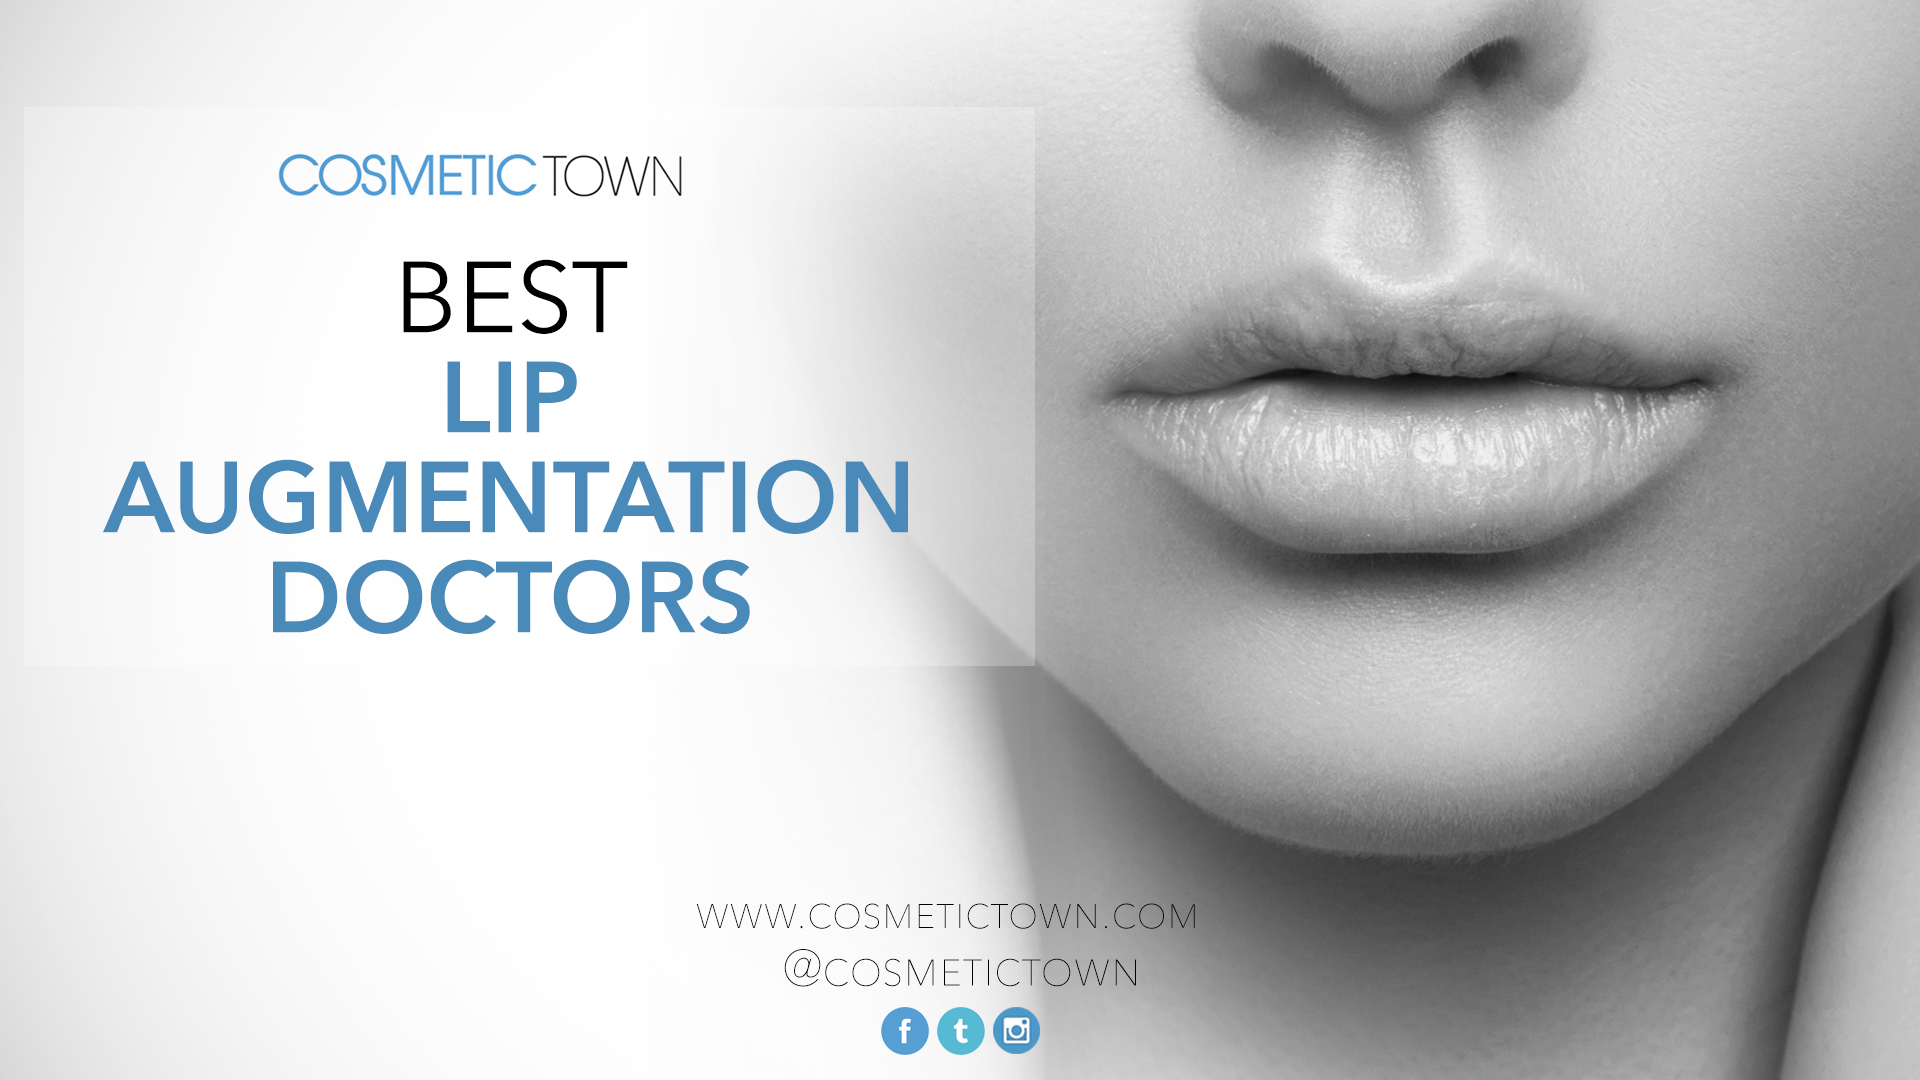 Who are the Best Lip Augmentation Doctors in San Diego?